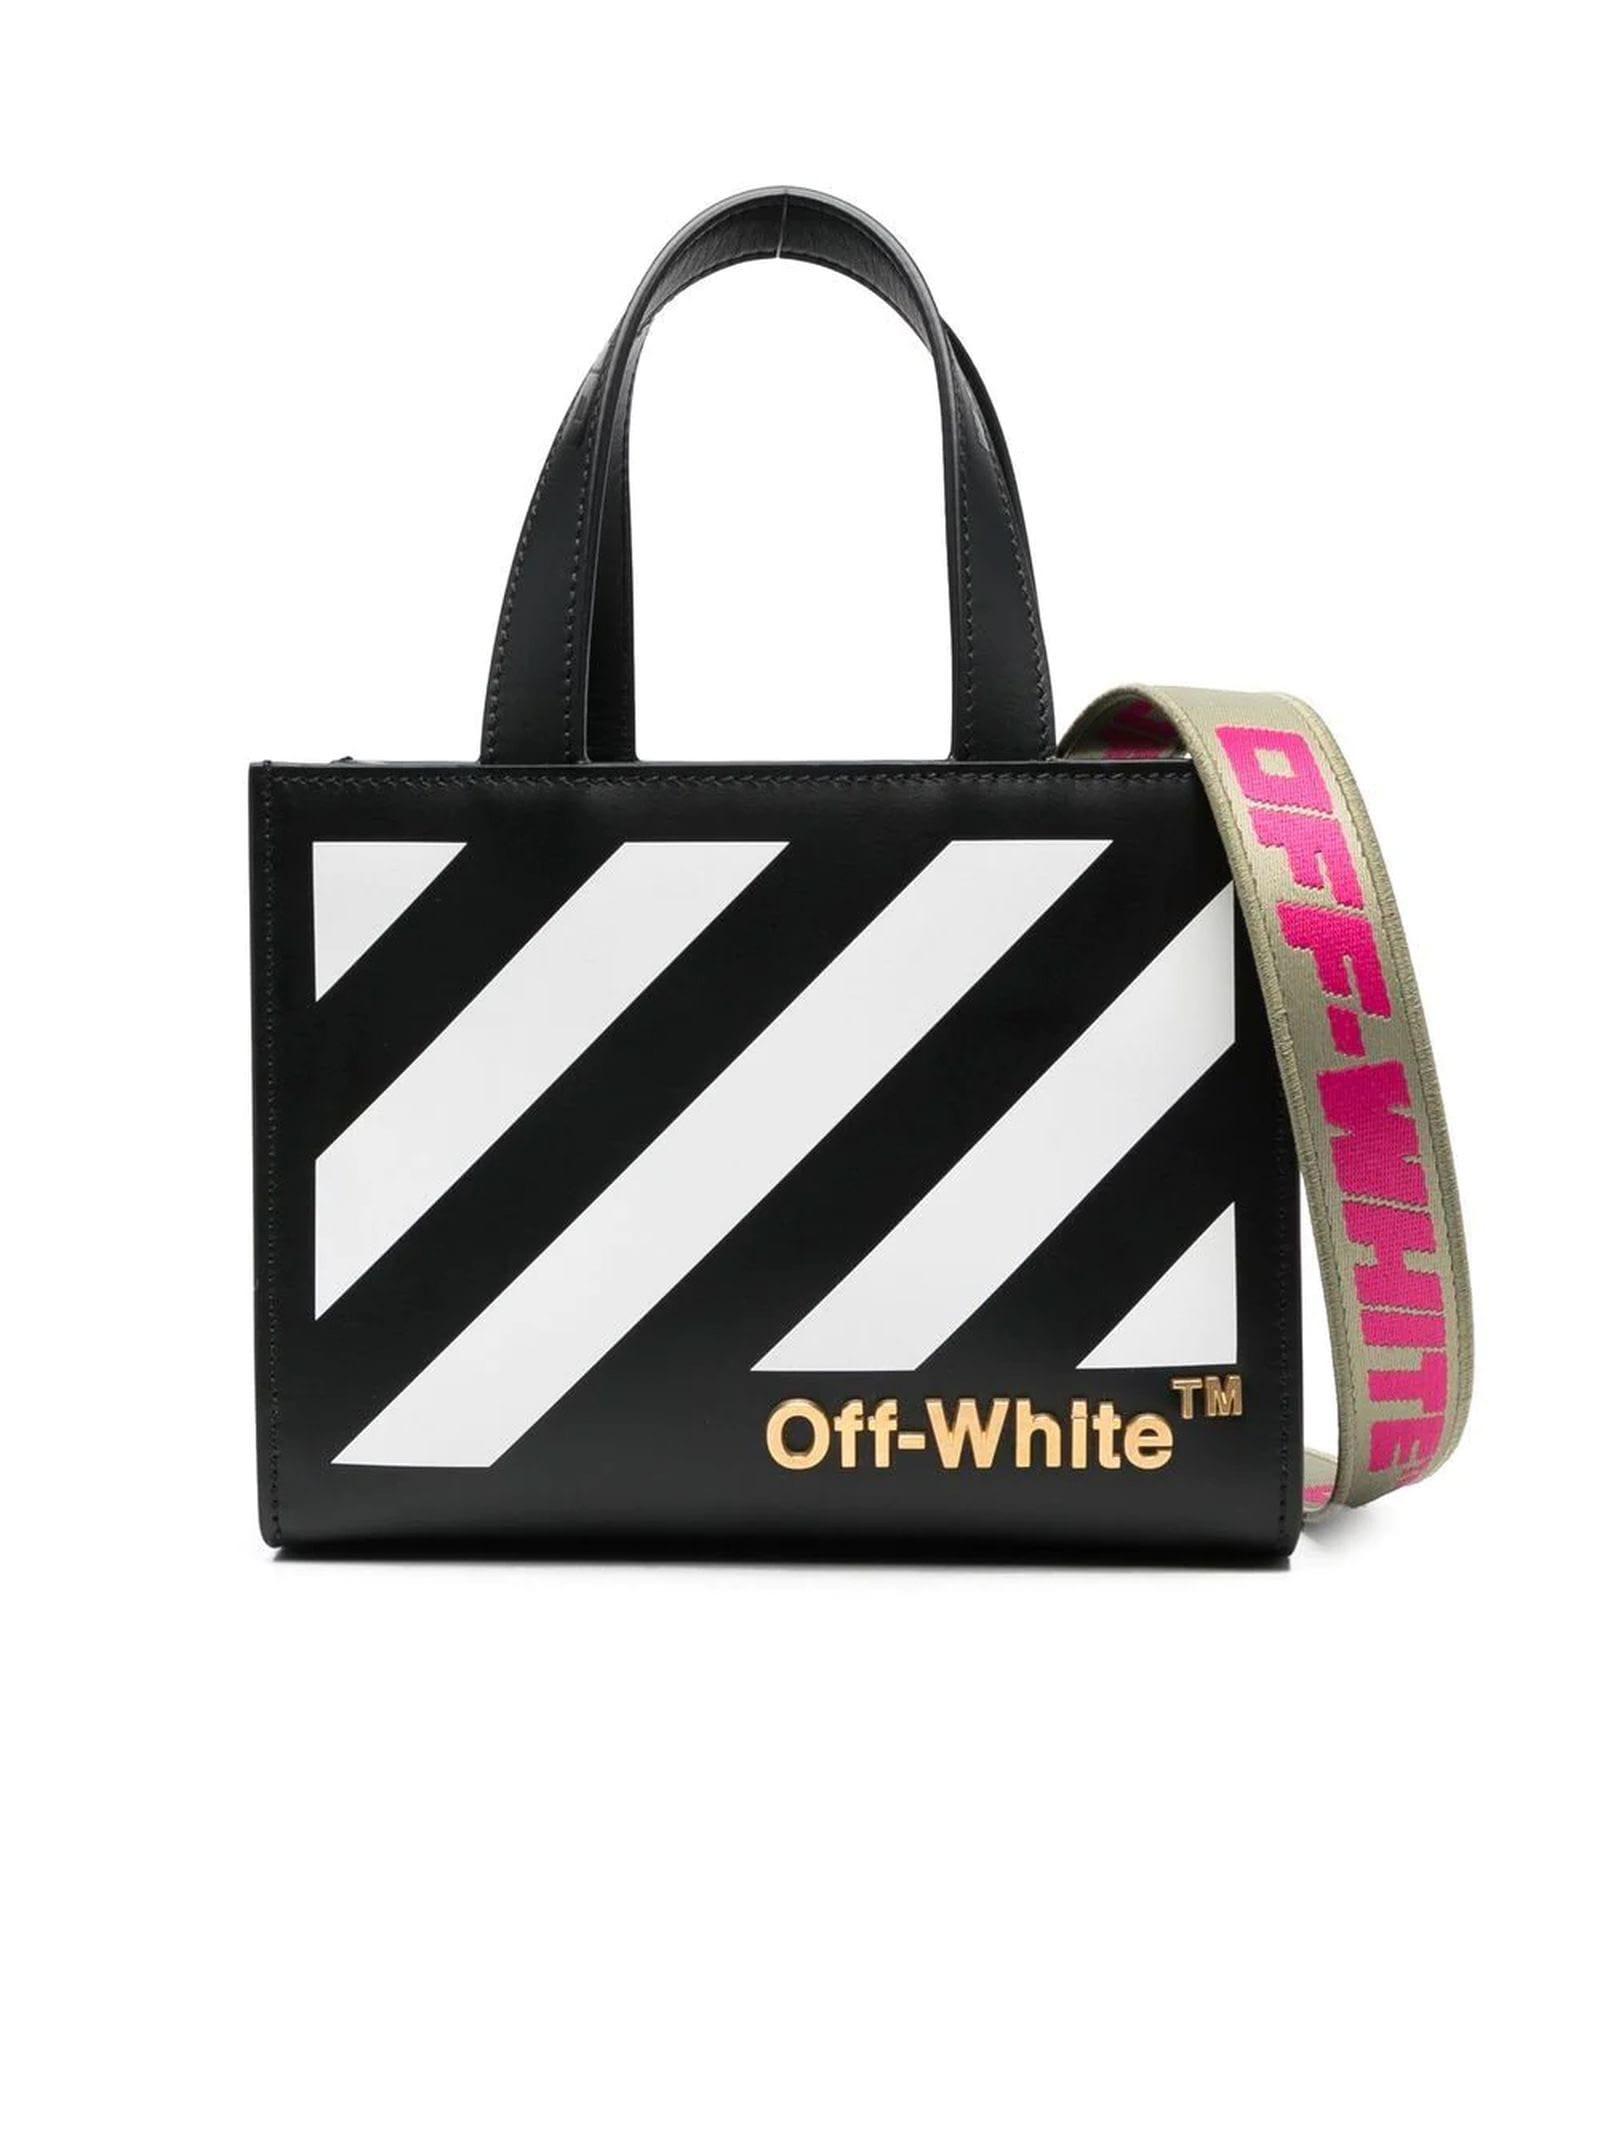 OFF-WHITE Diag Flap Bag Leather White in Leather with Silver-tone - US